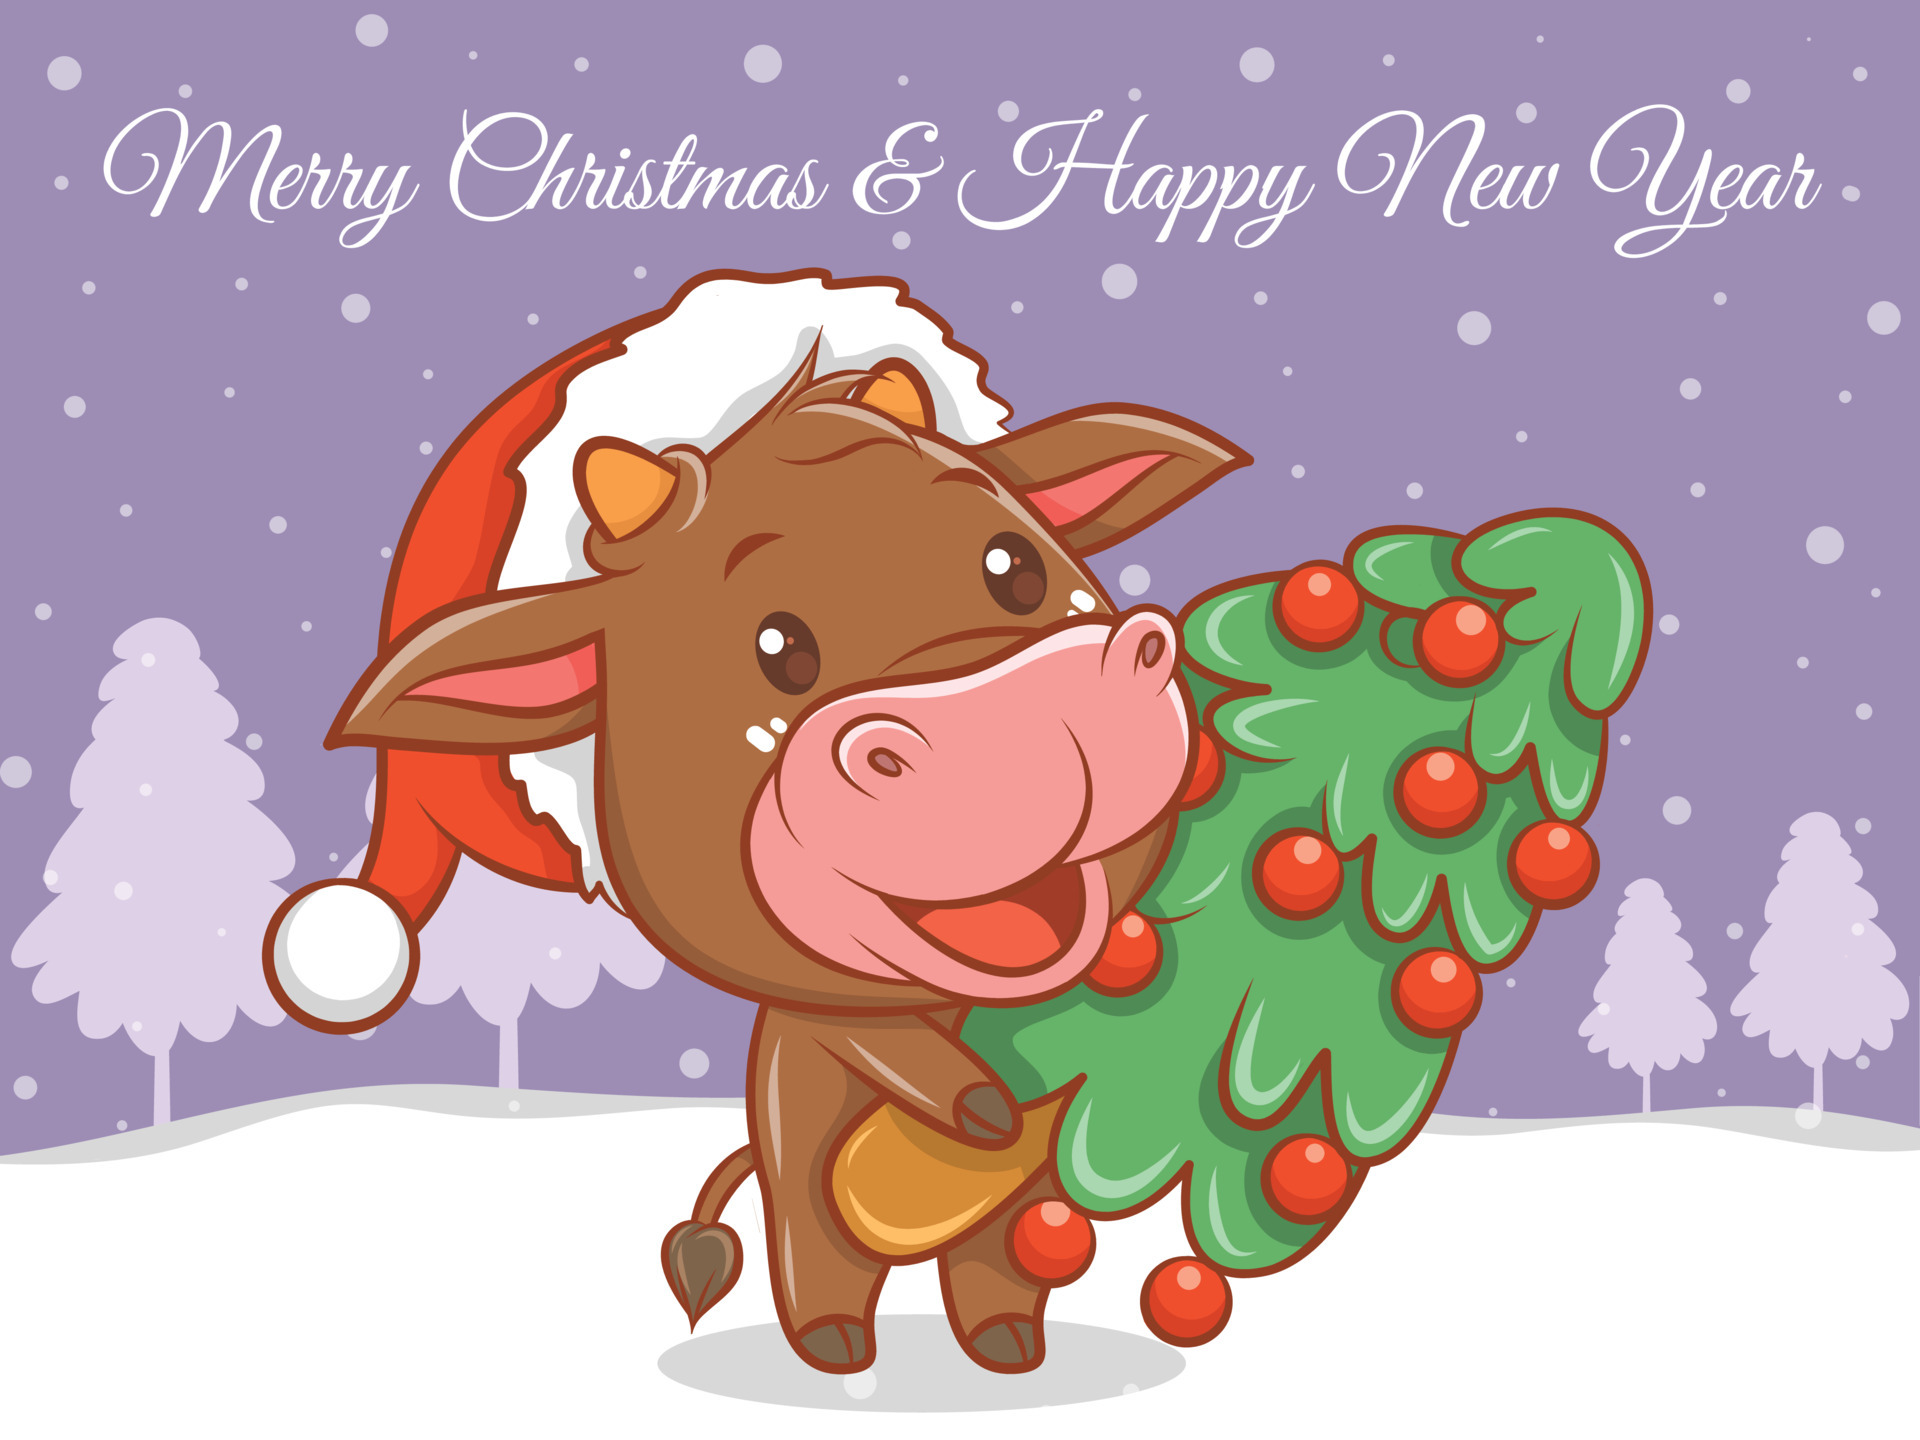 cute cow cartoon character with merry Christmas and happy new year greeting banner